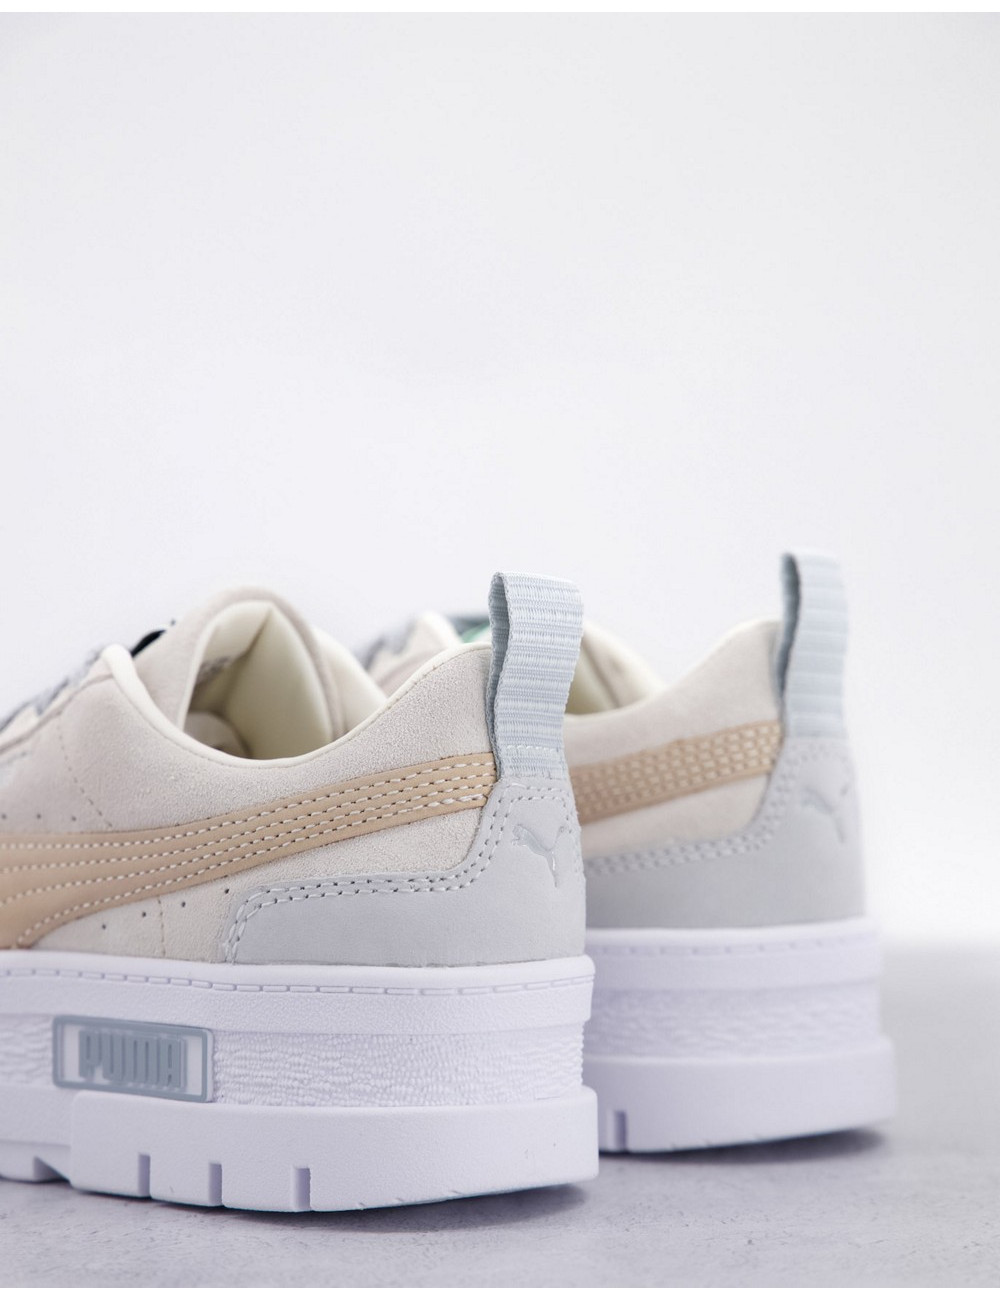 Puma Mazye Luxe trainers in...